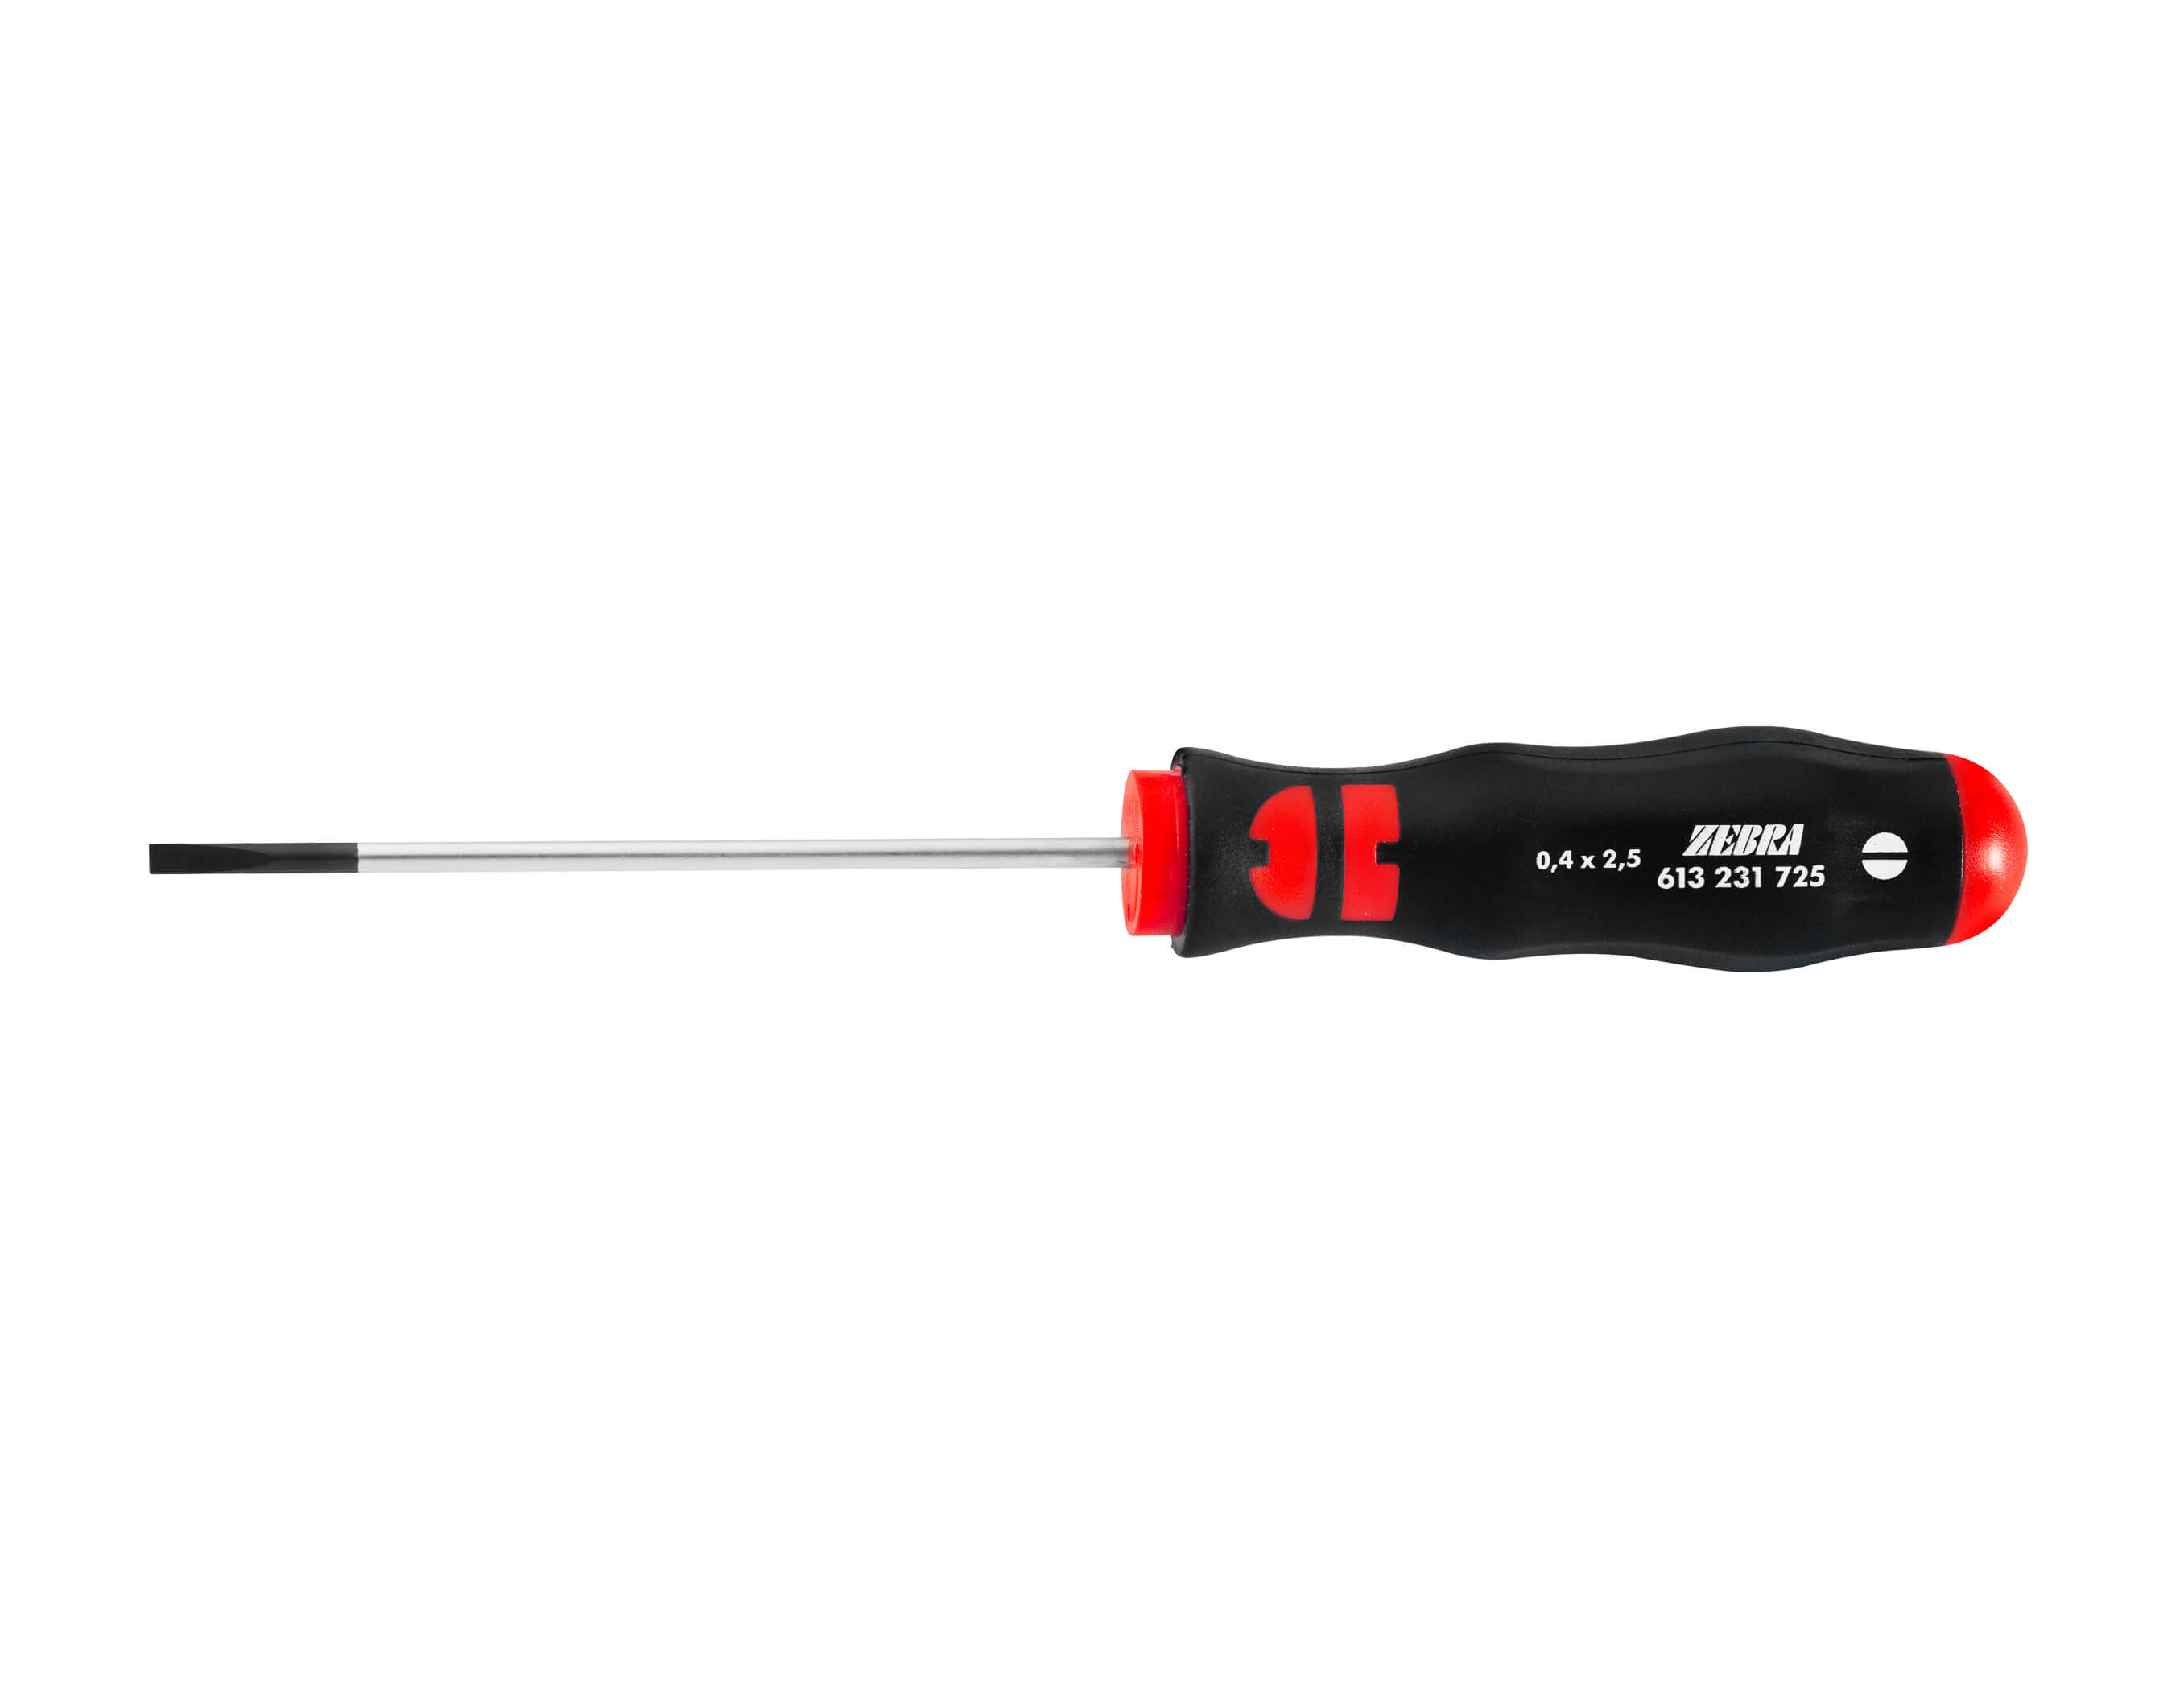 Slotted screwdriver round blade narrow 1.0X5.5X150